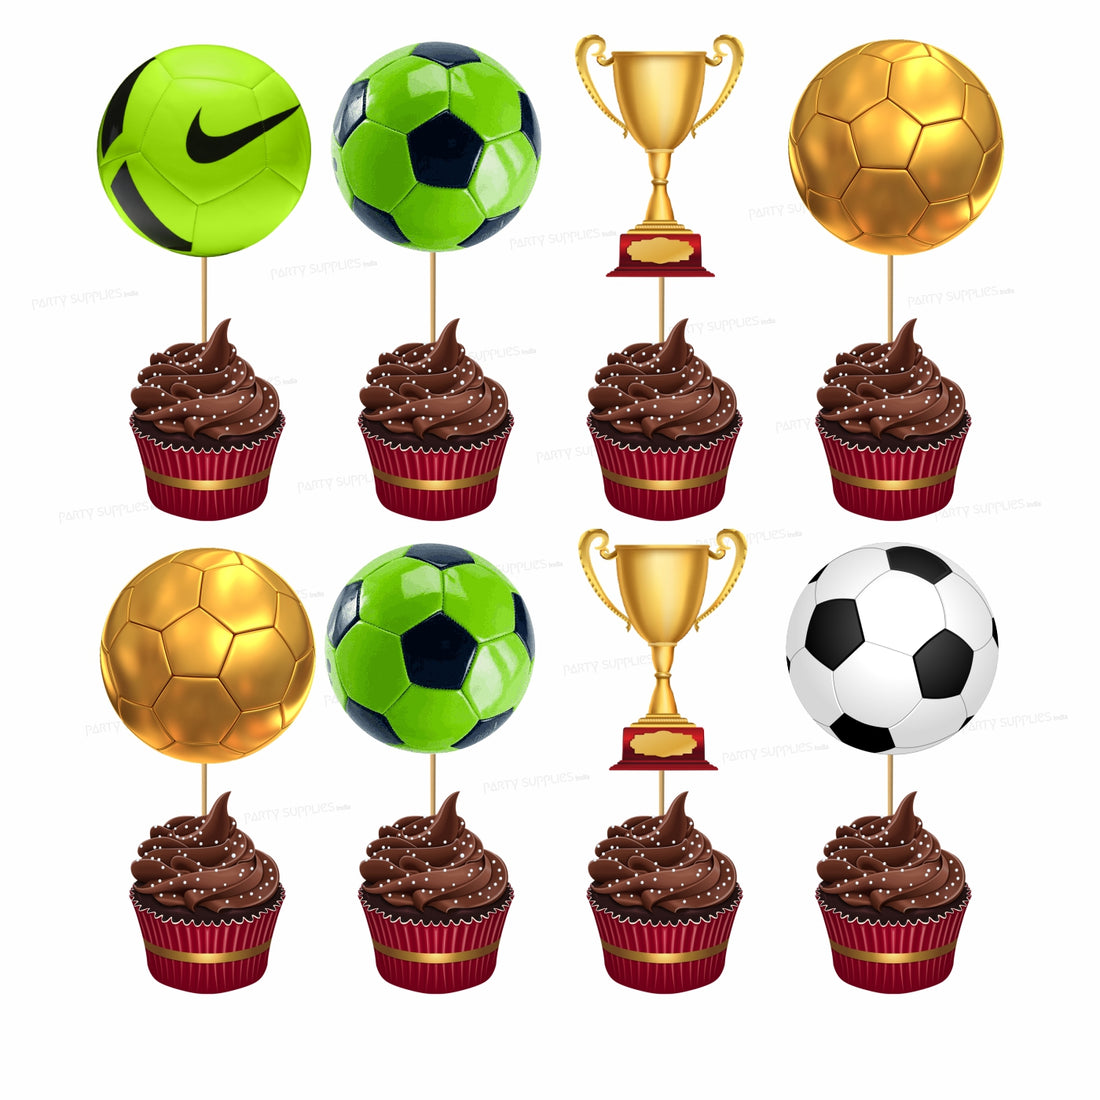 PSI Football Theme Cup Cake Topper